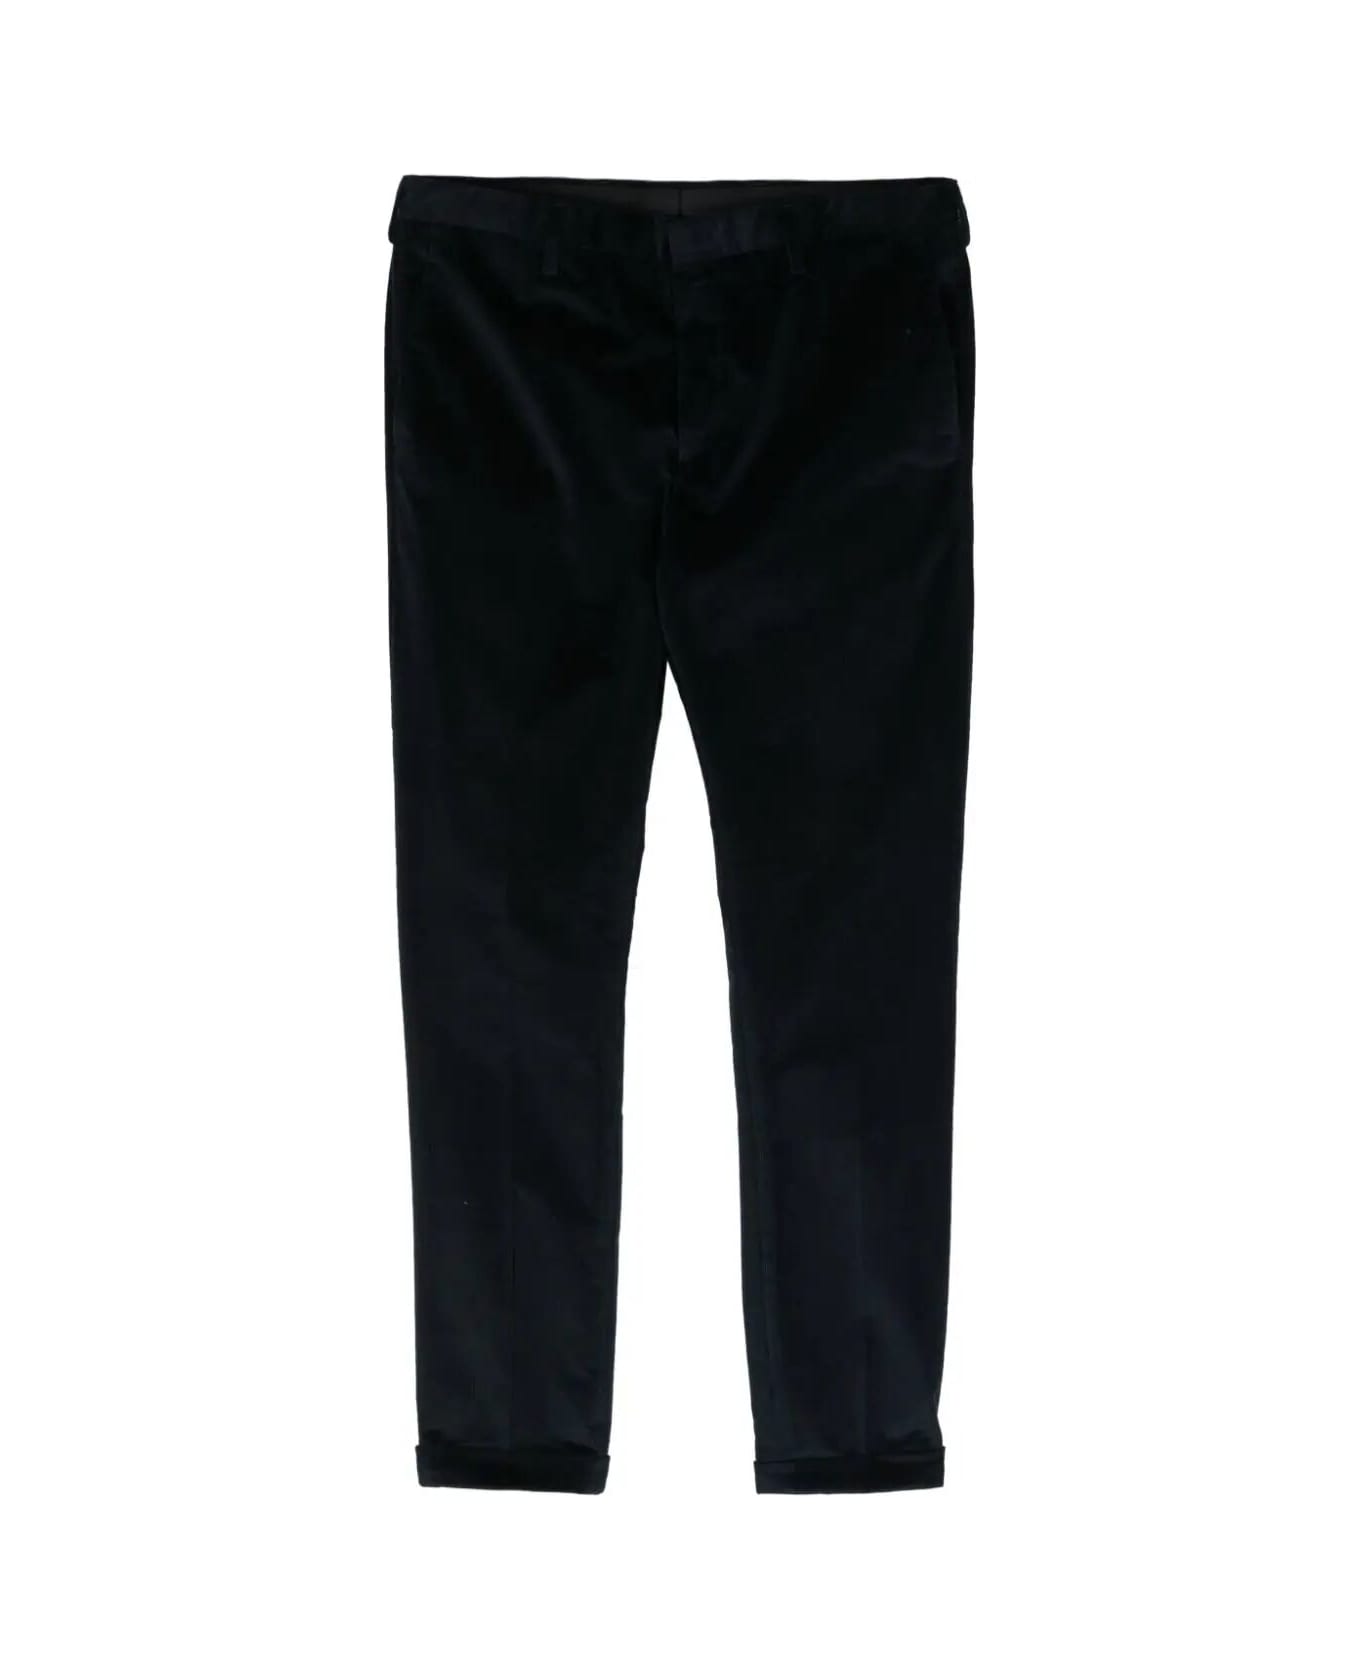 Paul Smith Mens Trousers - Navy